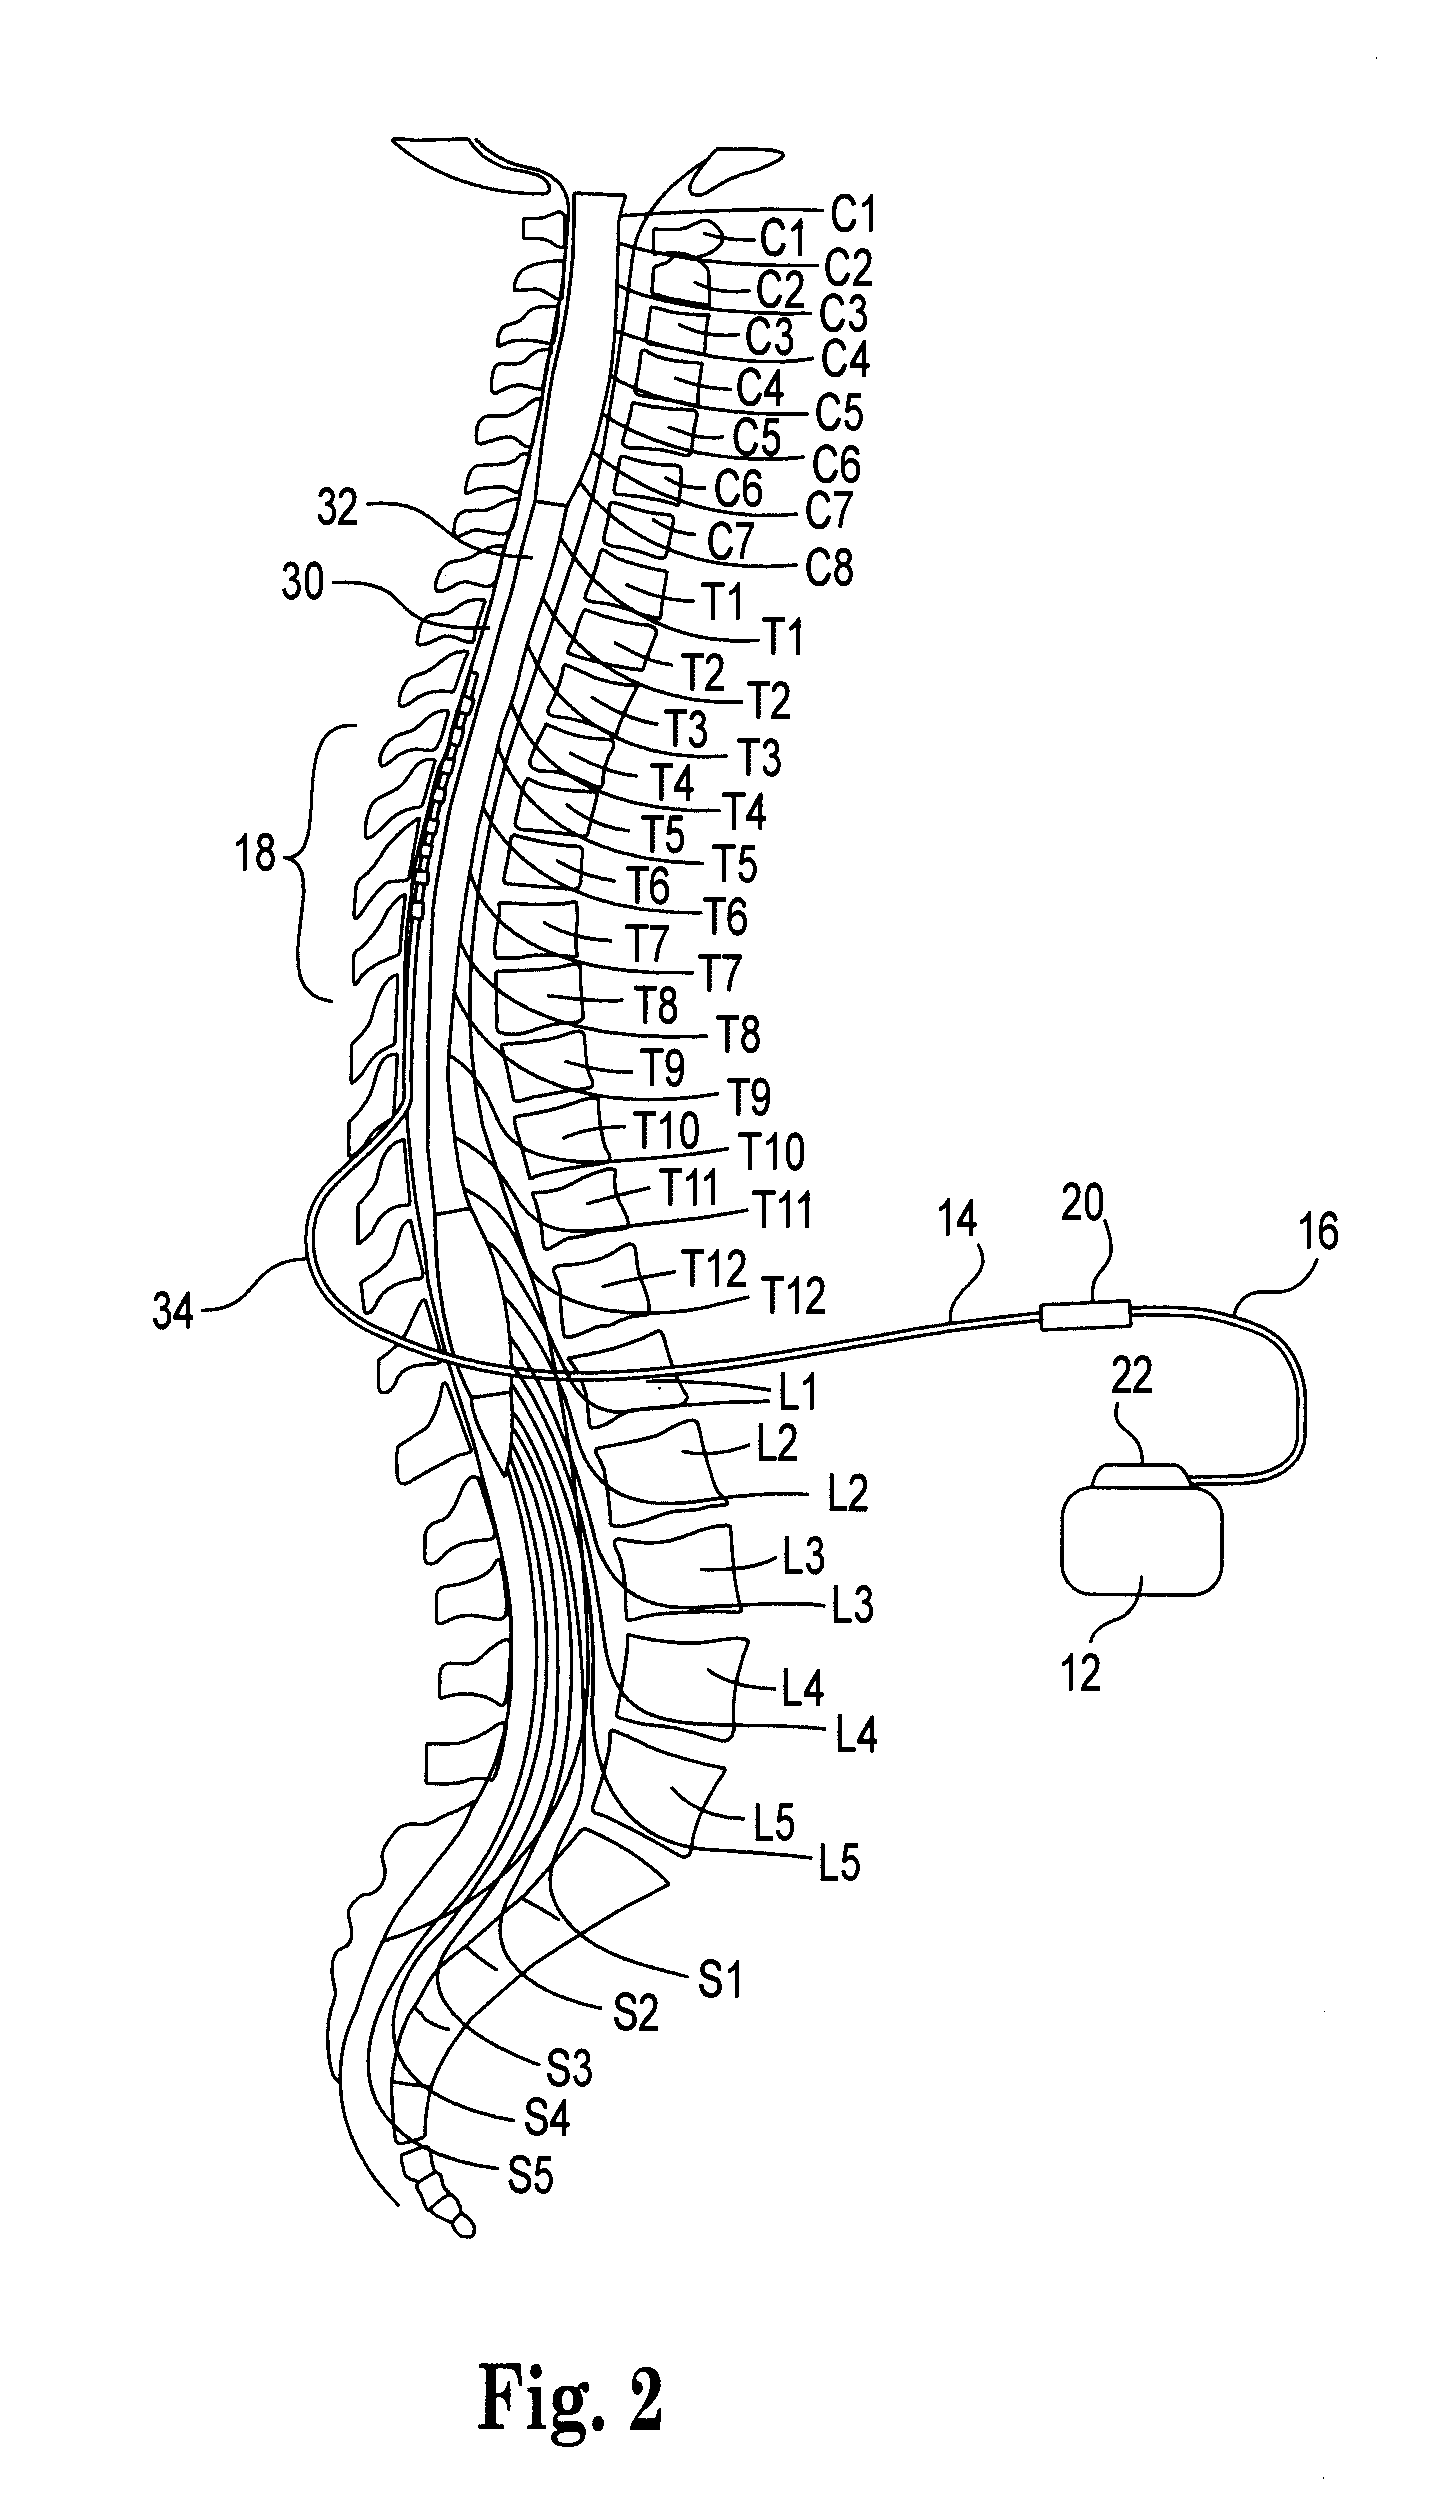 Epidural needle for spinal cord stimulation